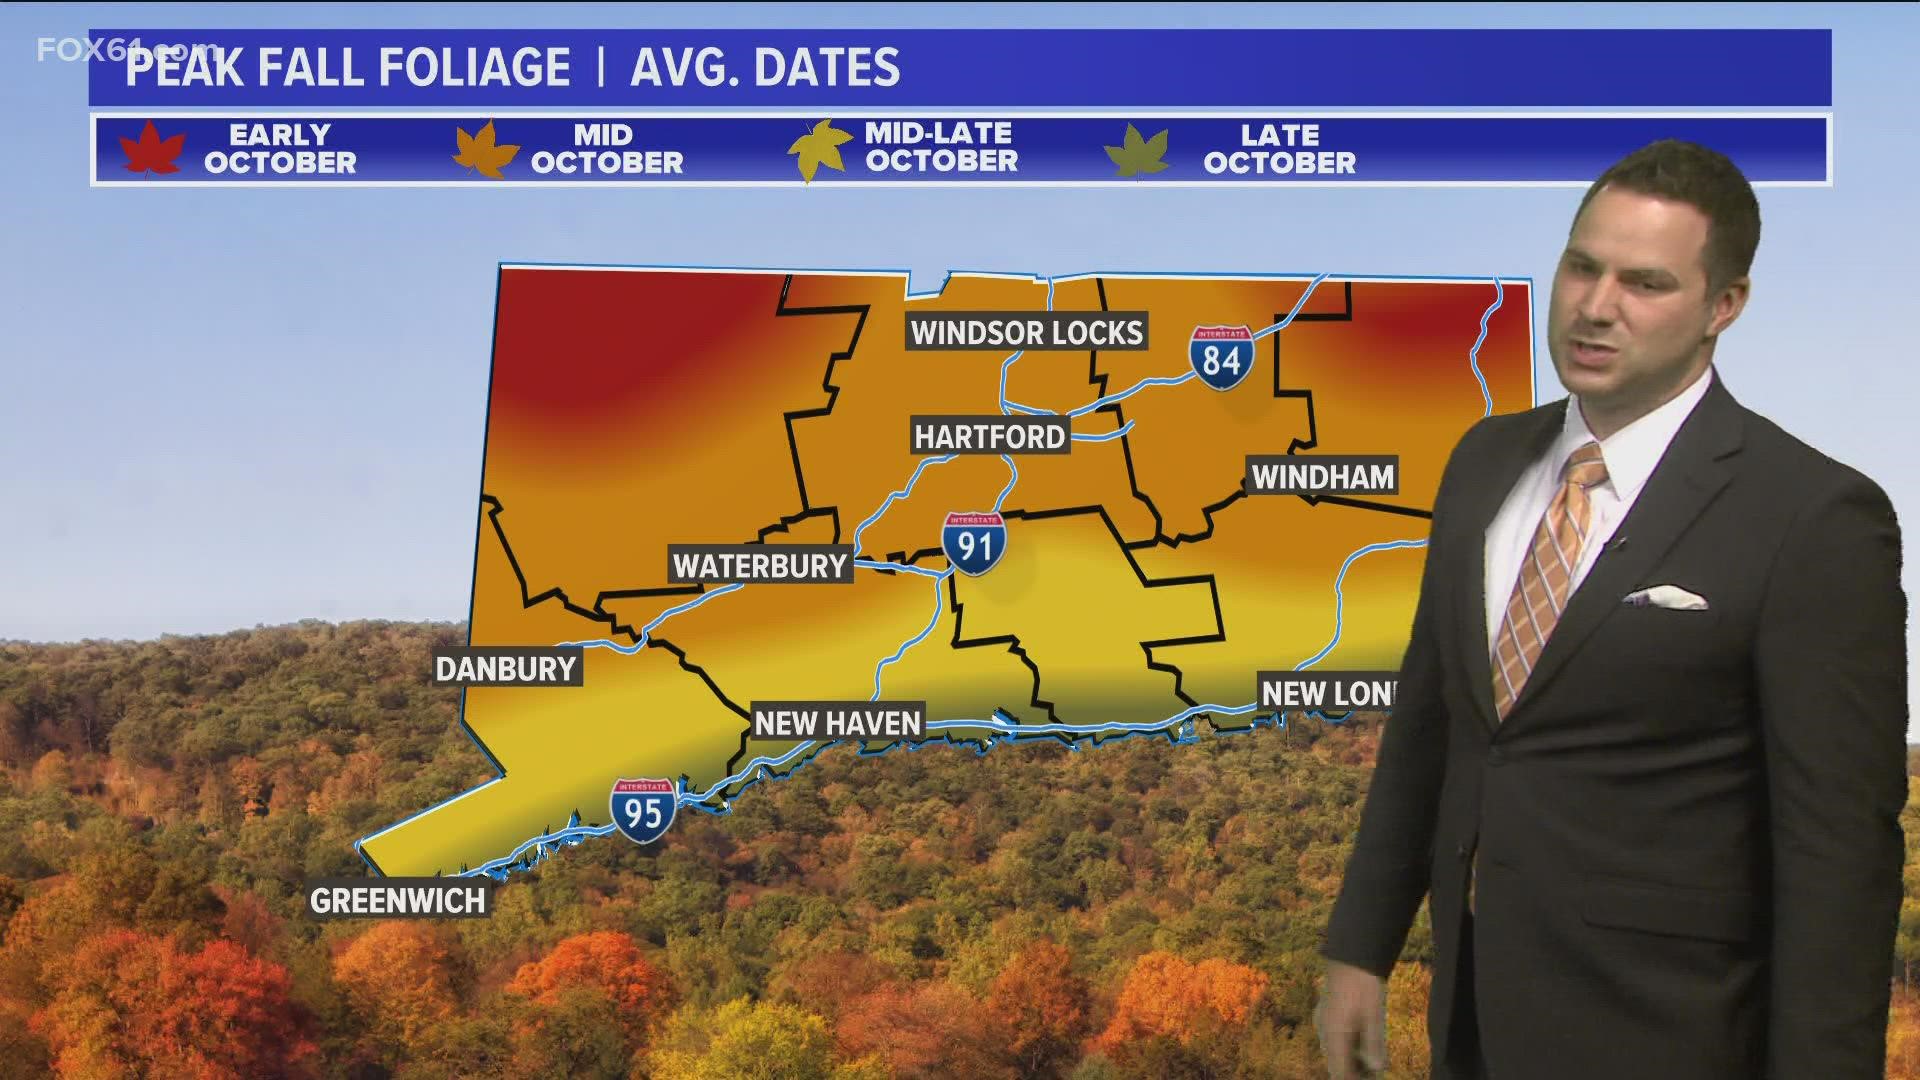 In a normal season, peak foliage is usually early to mid-October for most of the state, starting from the hills to the north and extending down to the shoreline.